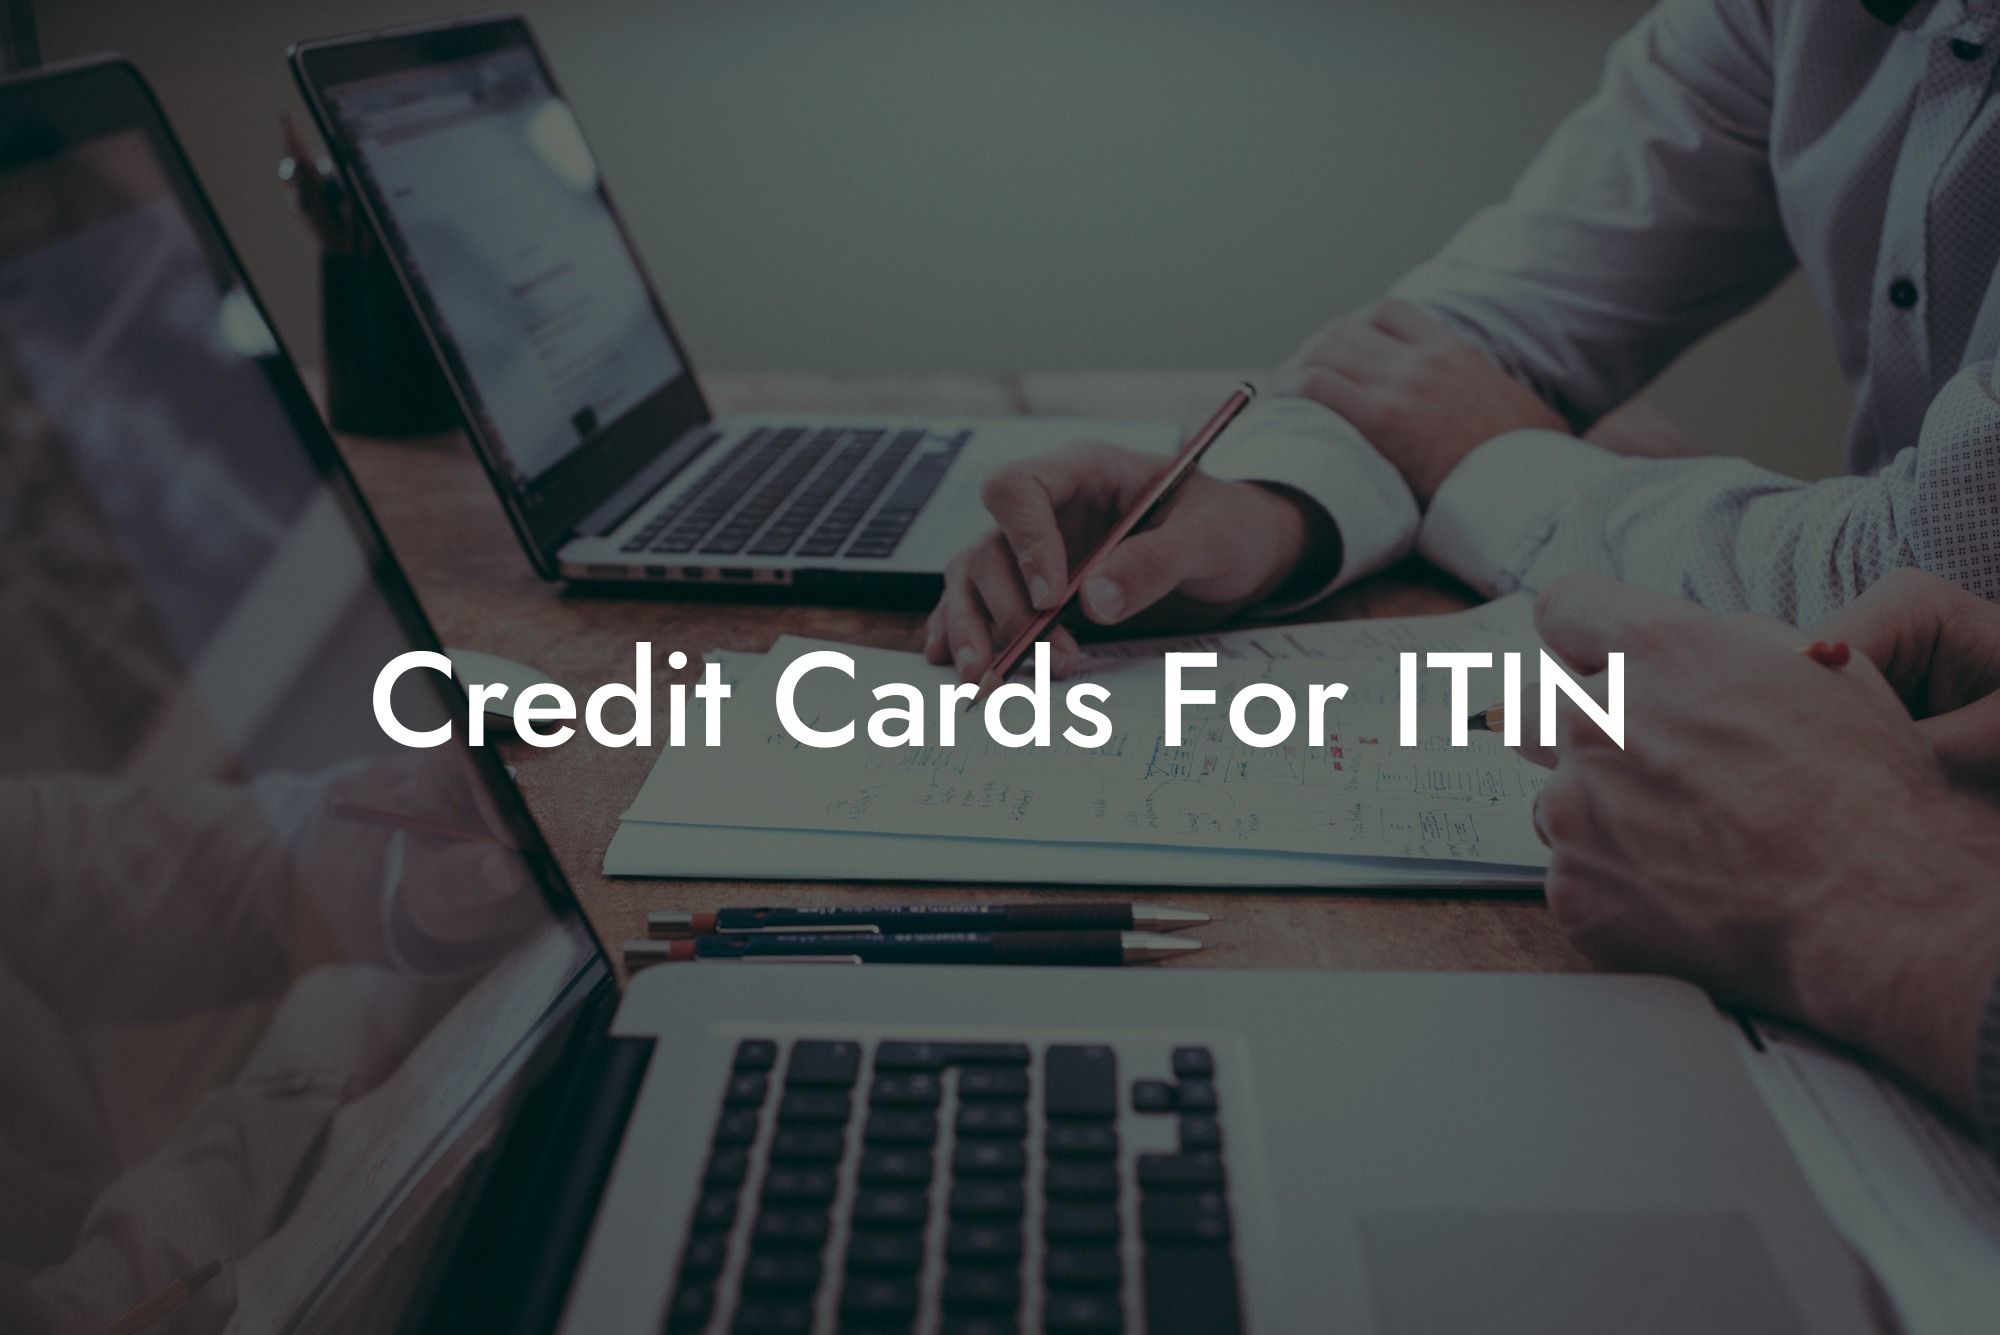 Credit Cards For ITIN